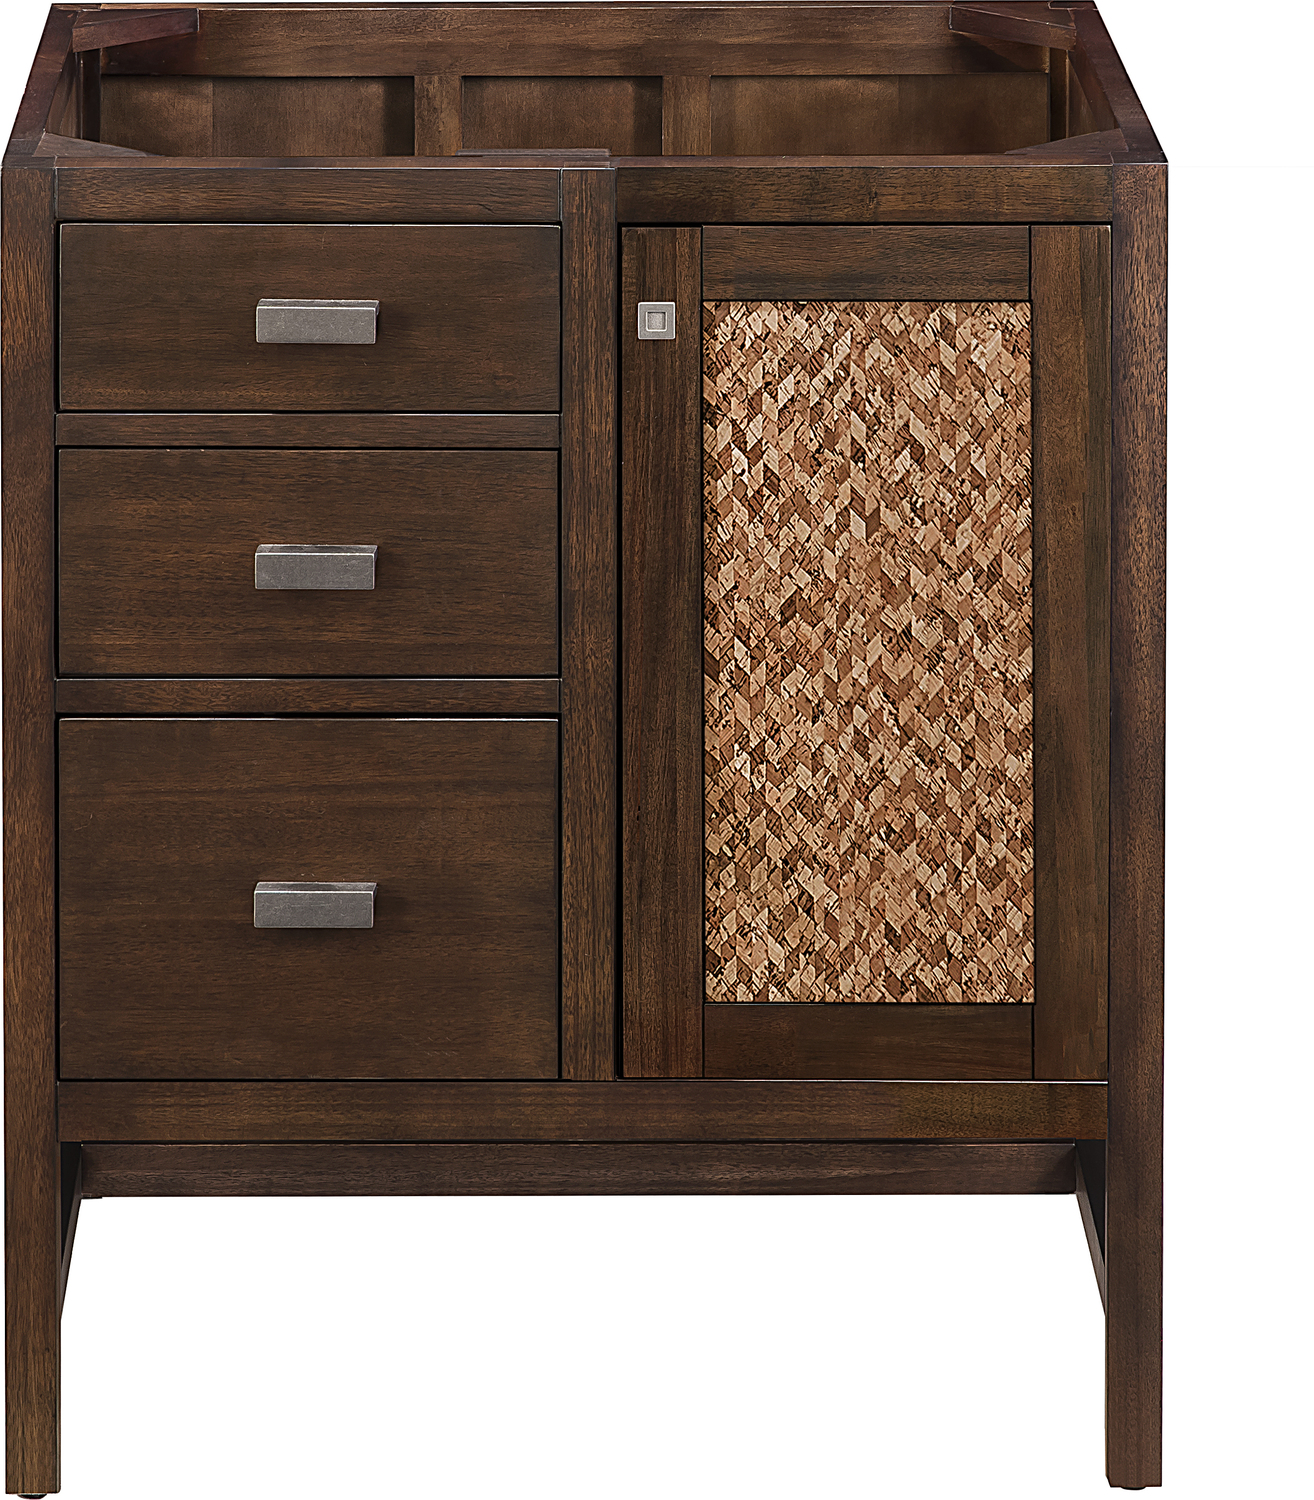 60 bathroom vanity without top James Martin Cabinet Mid-Century Acacia Traditional, Transitional